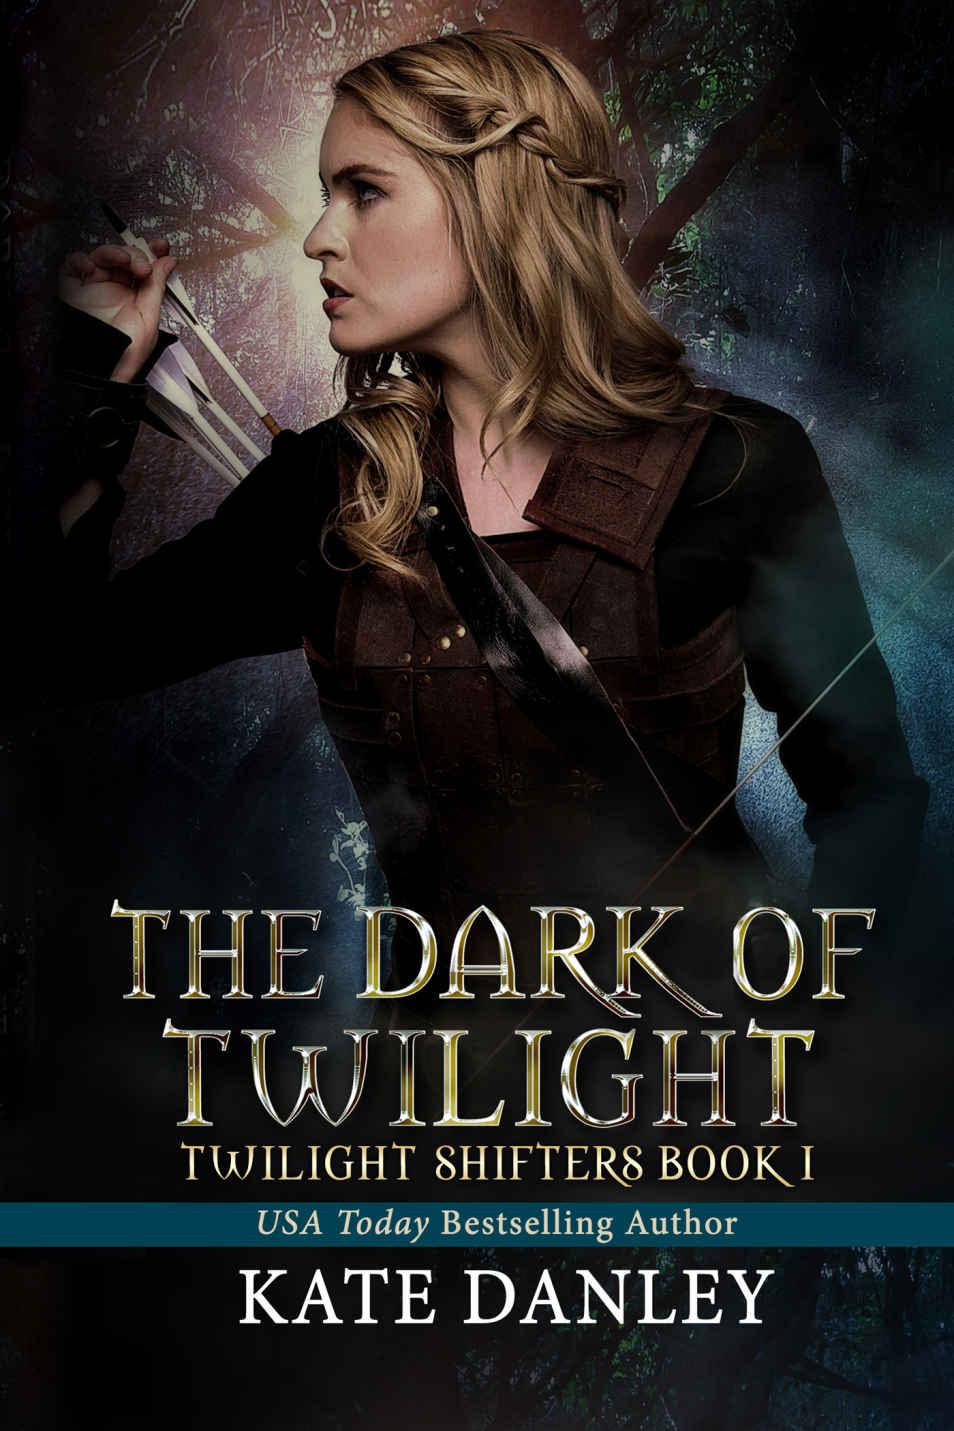 The Dark of Twilight (Twilight Shifters Book 1) by Kate Danley